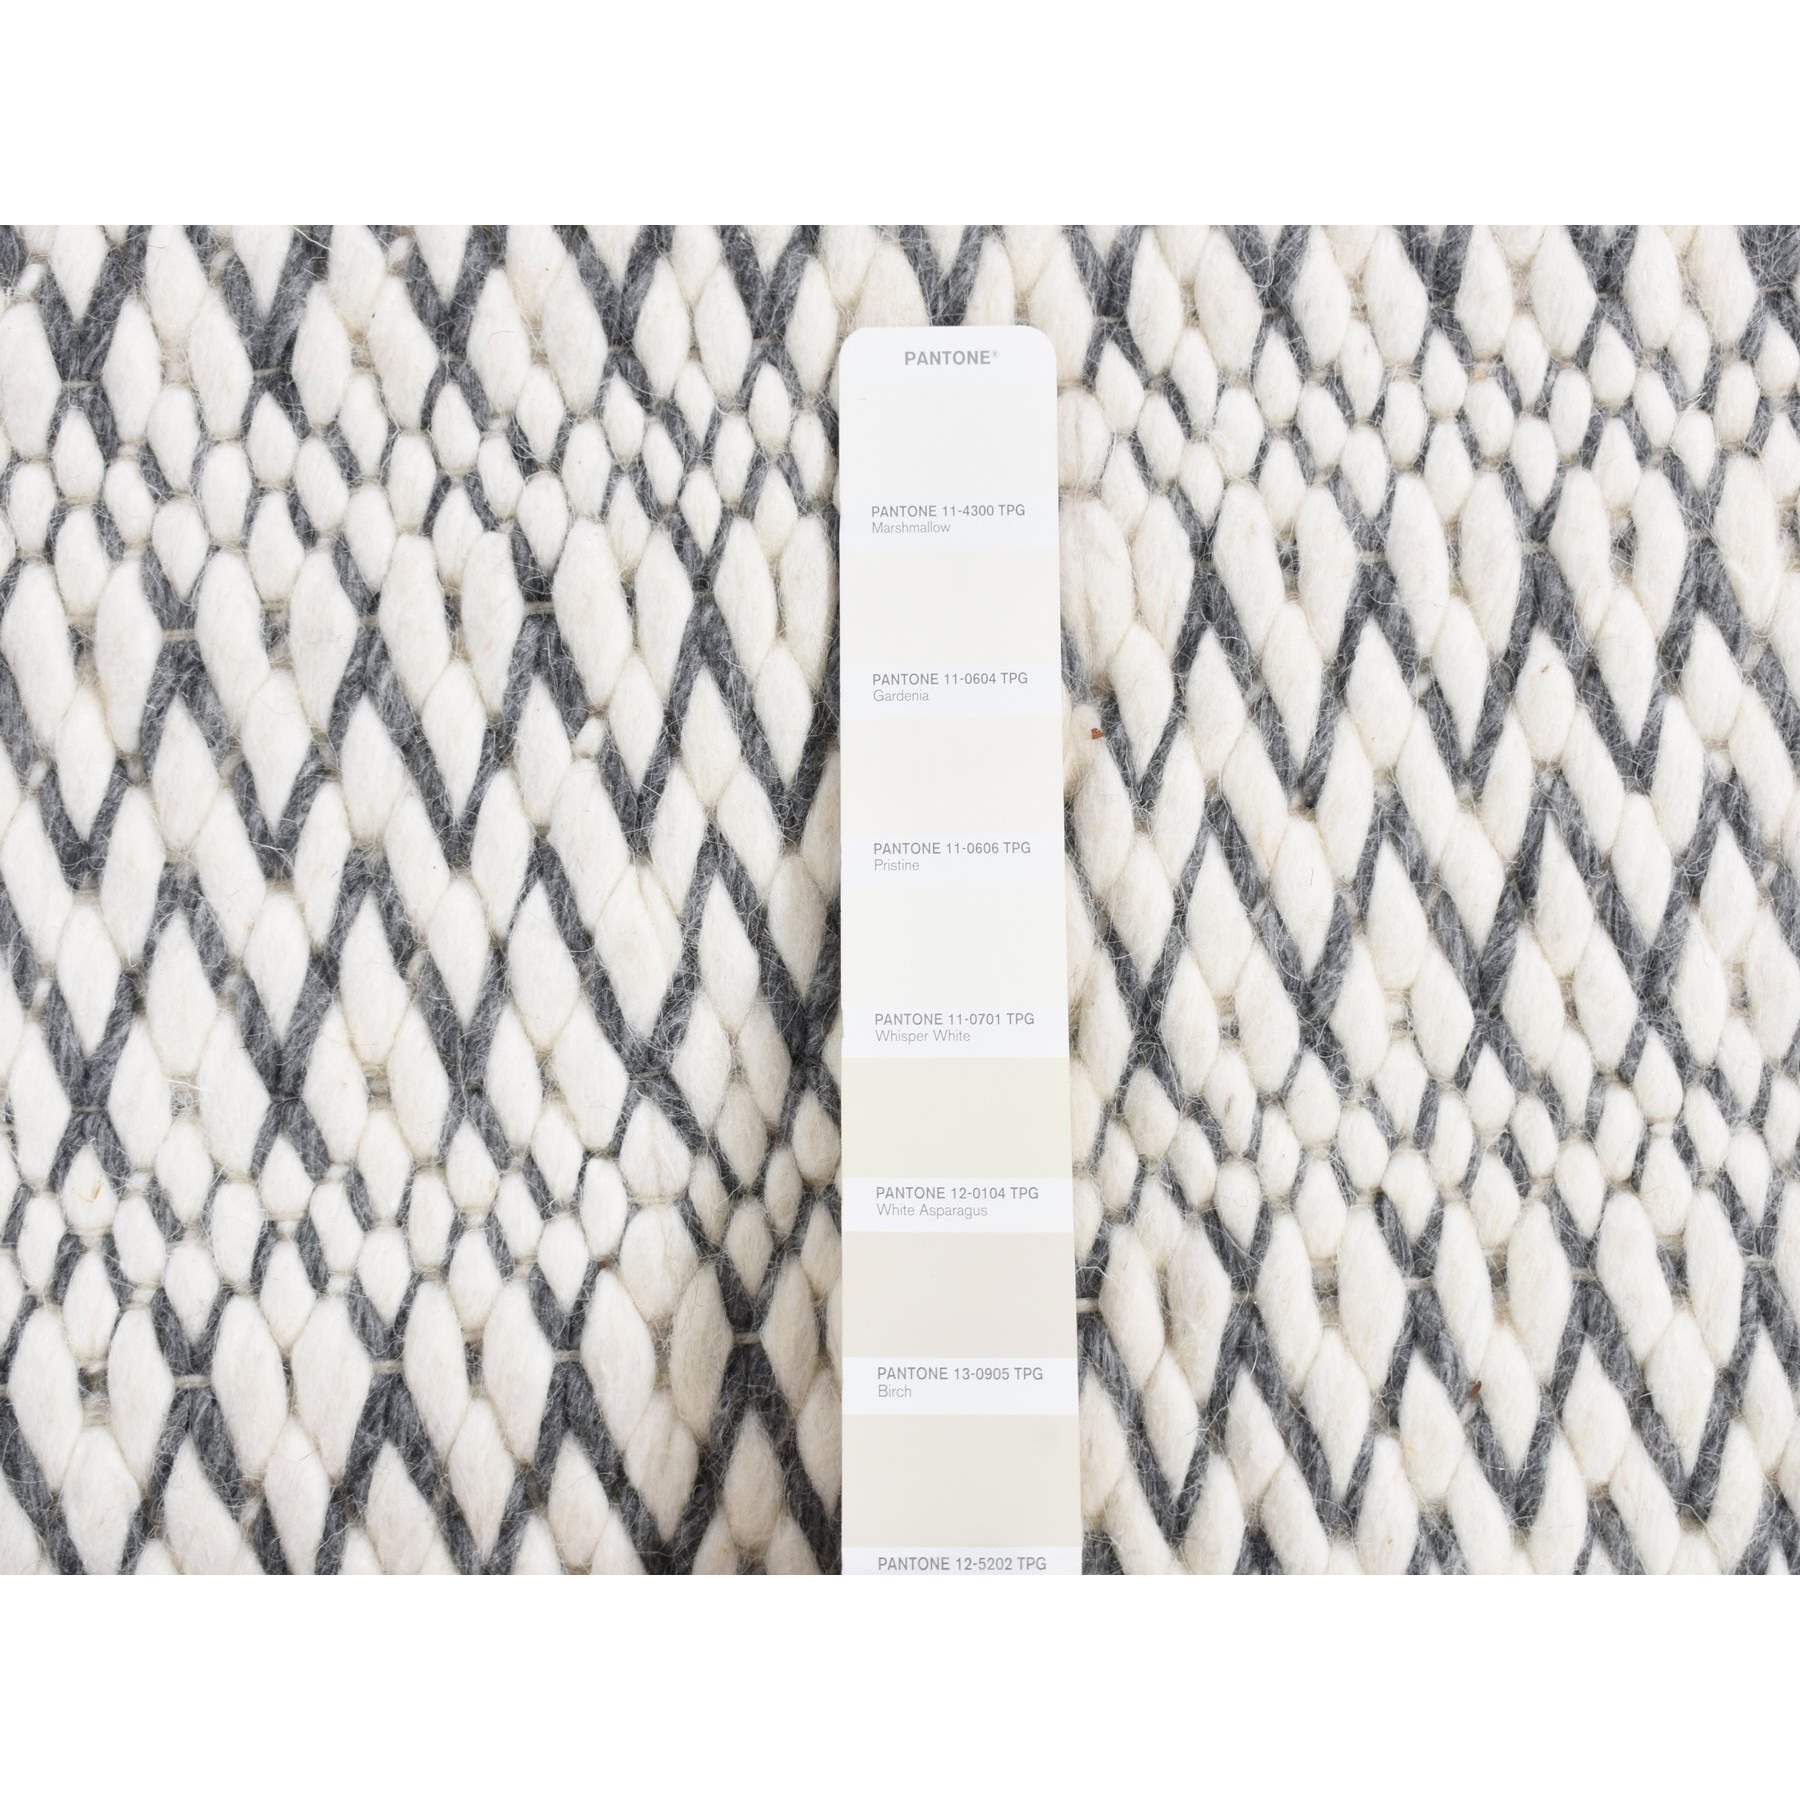 Modern-and-Contemporary-Hand-Woven-Rug-437075